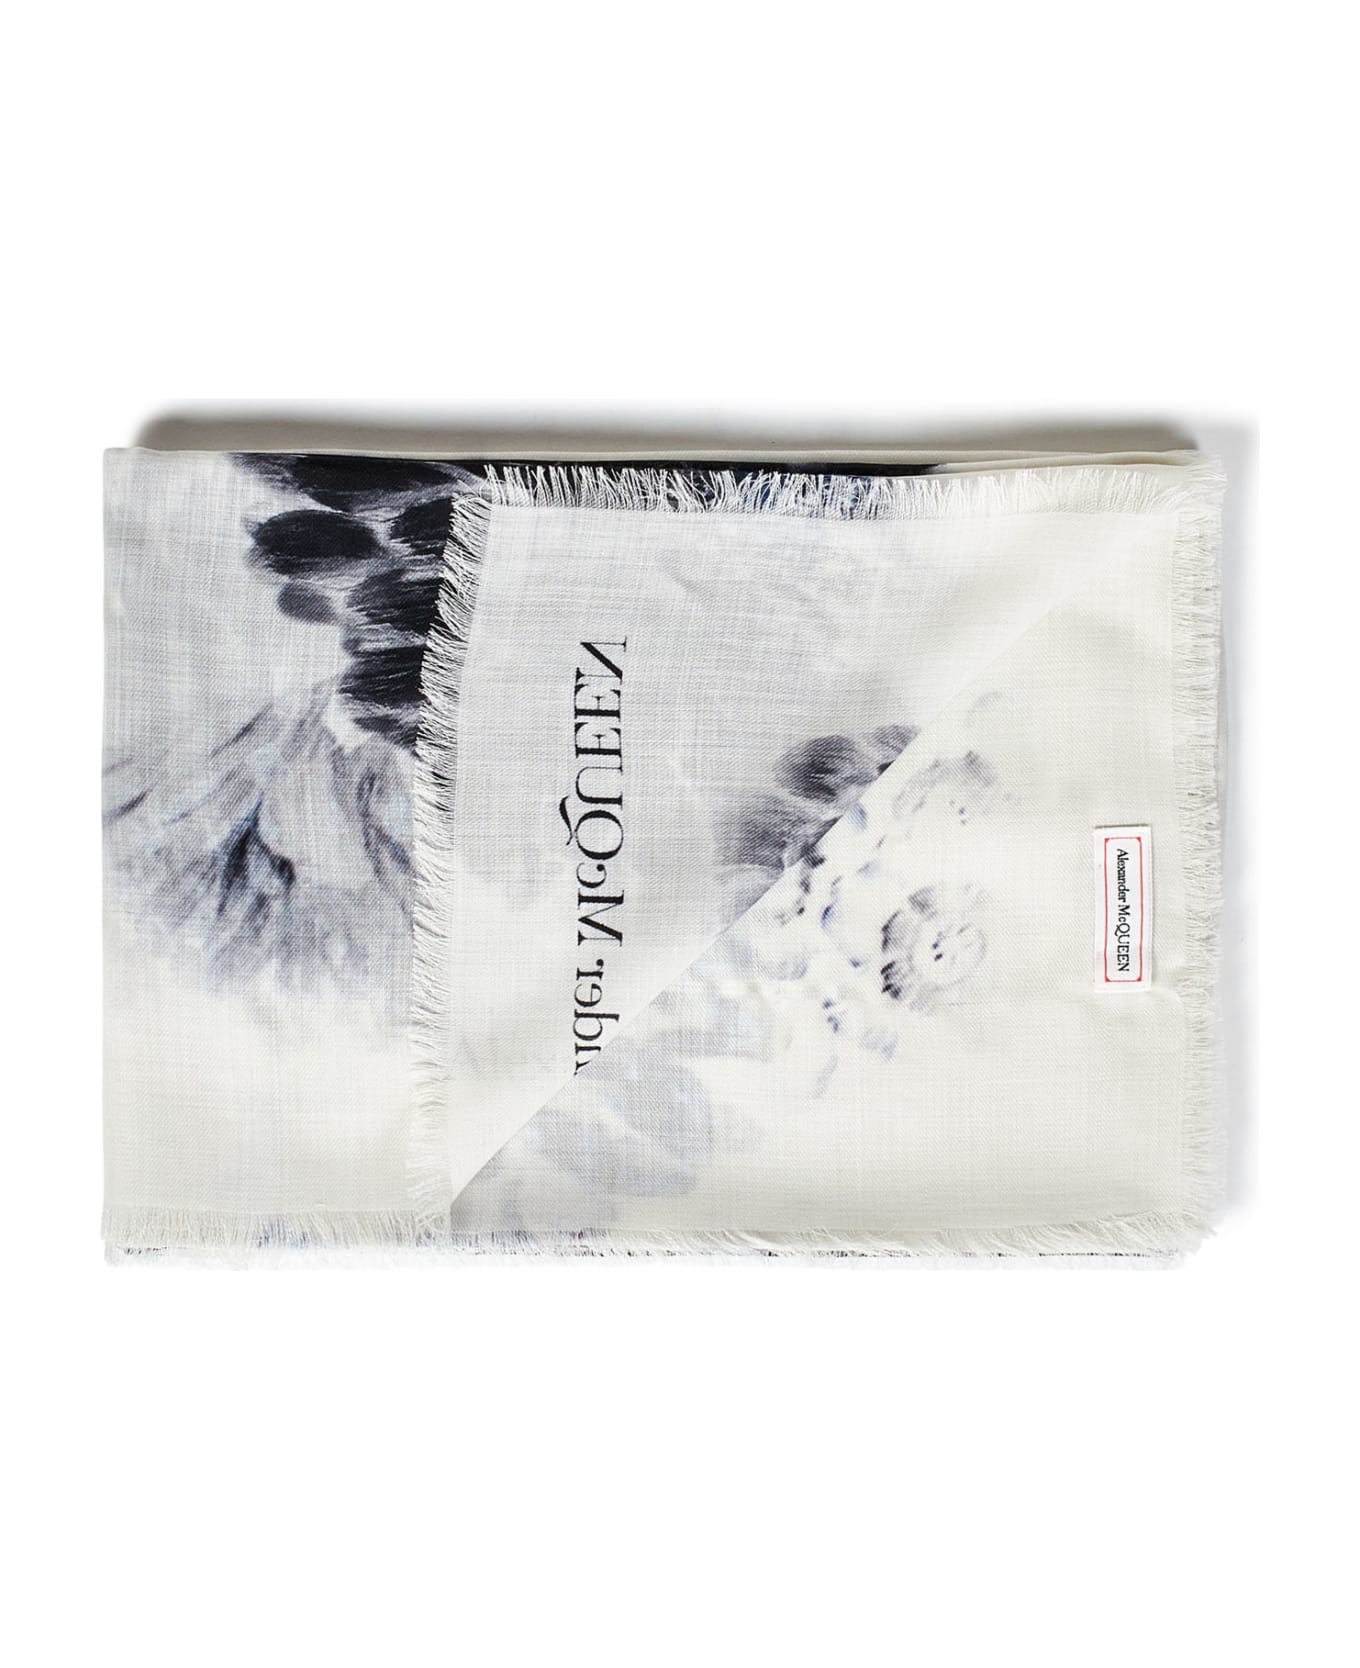 Alexander McQueen Graphic Printed Scarf - Ivory